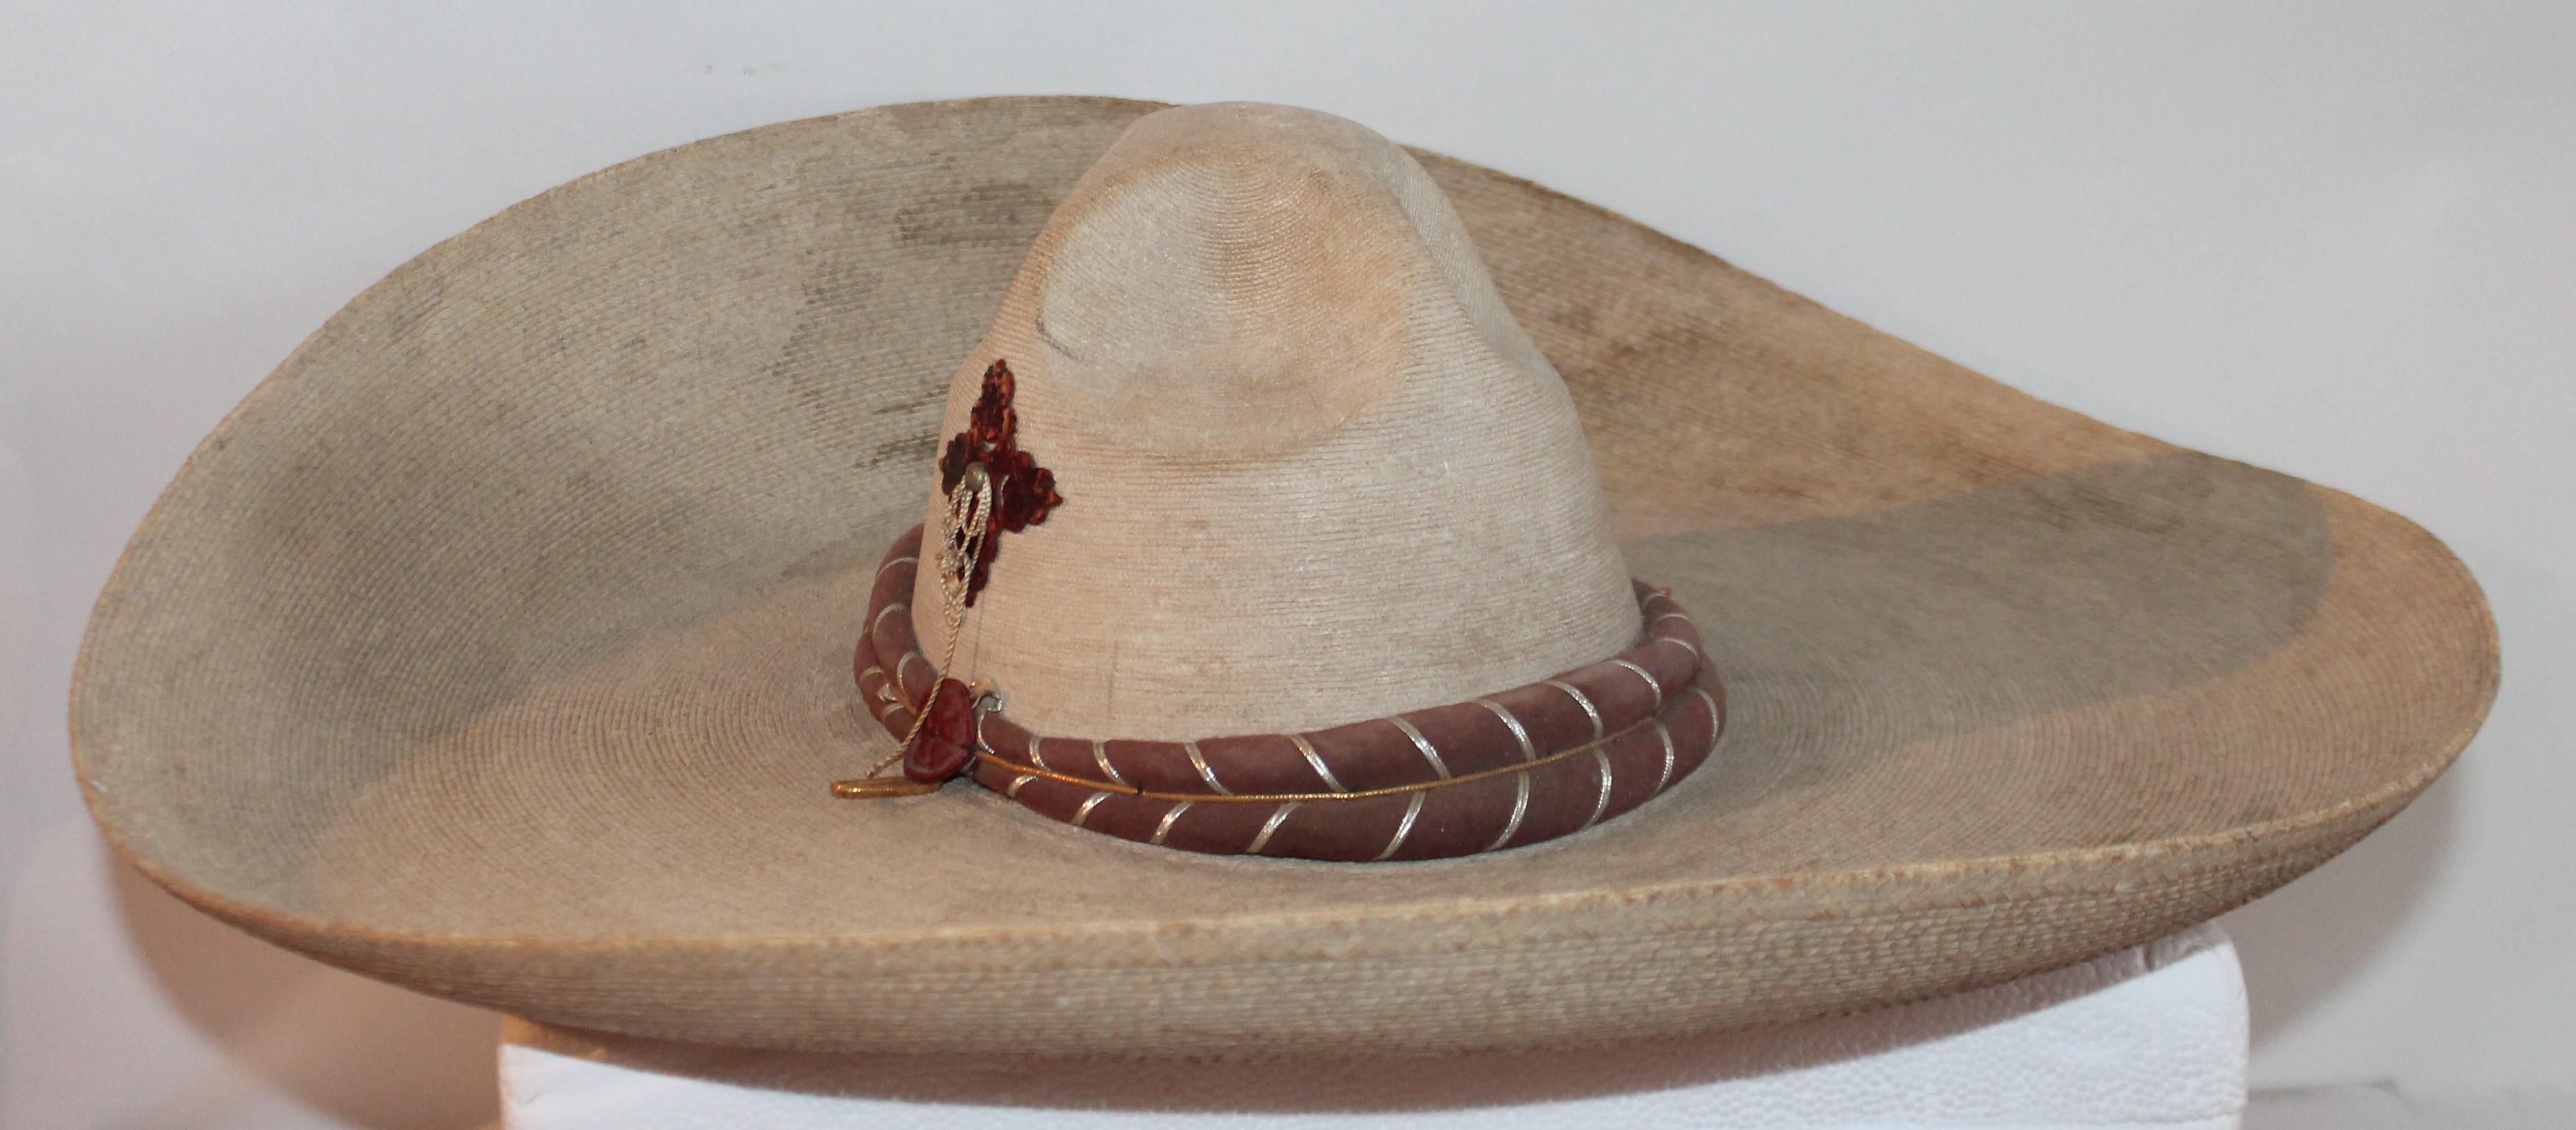 Collection of three handmade Mexican sombreros. In pristine condition with original label. Leather straps make the bans around the crown of two of the sombreros and the other has a beautiful handmade geometric pattern around the brim and the crown.